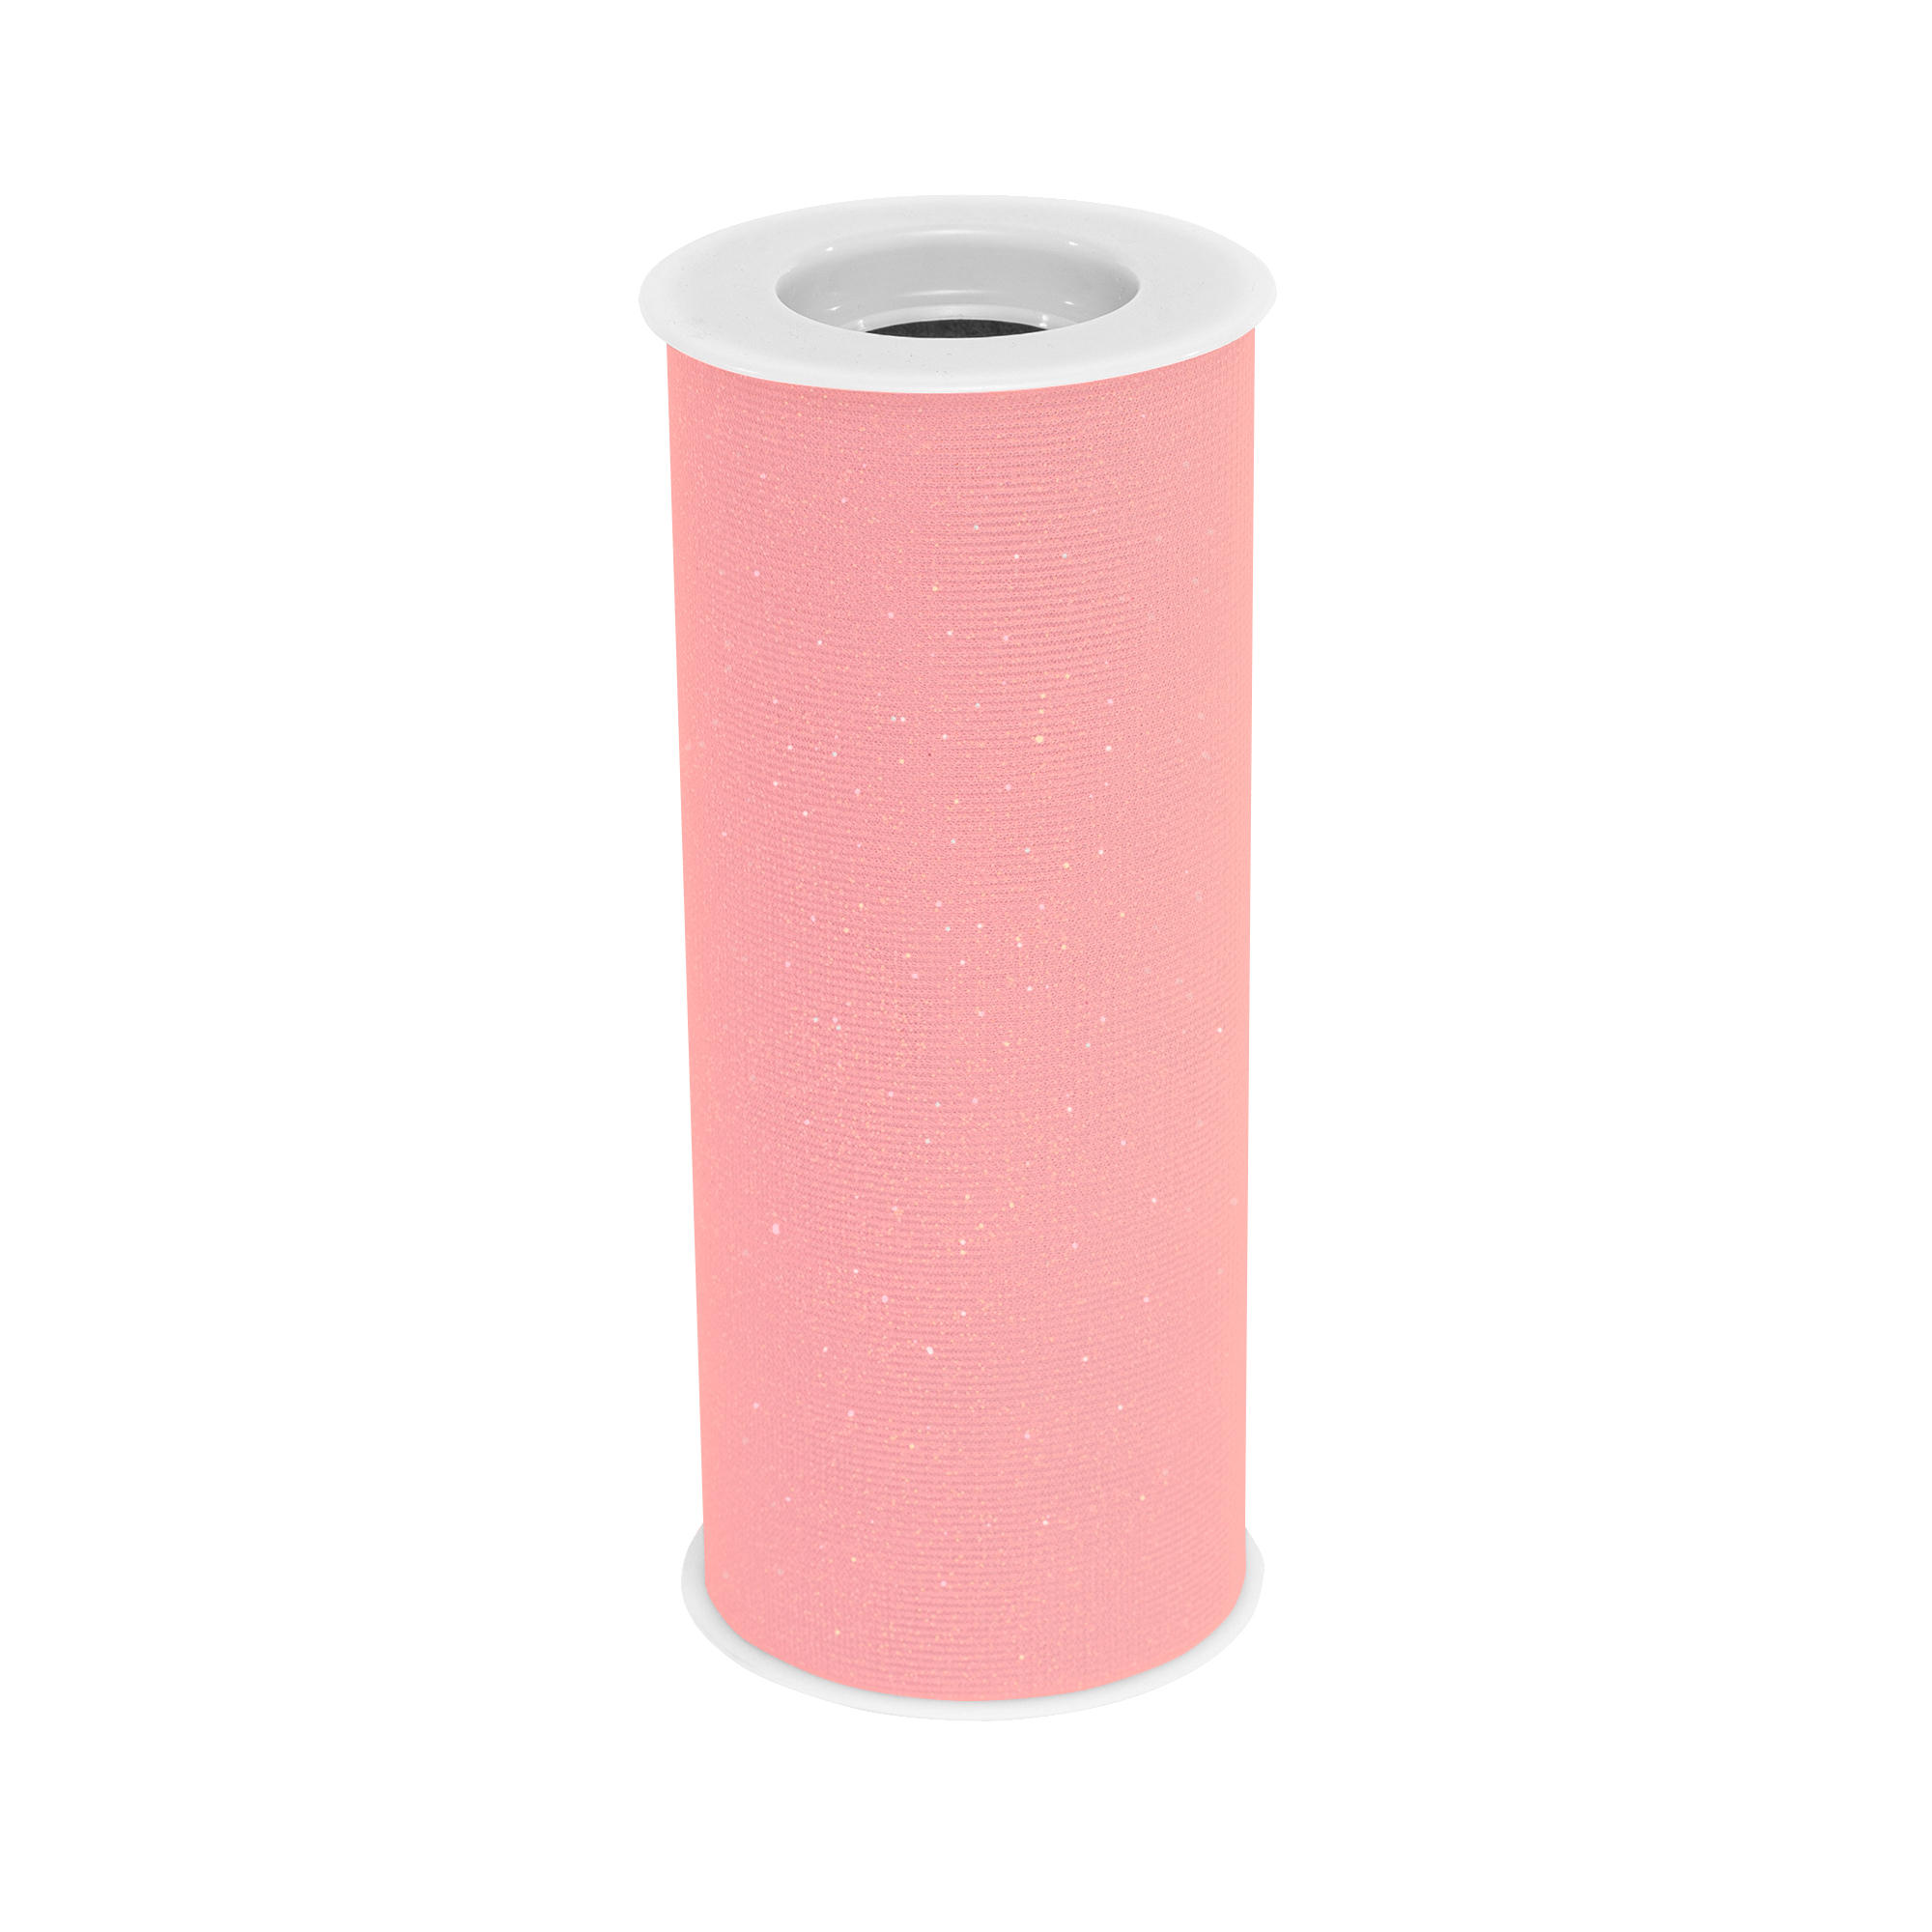 Glittered Tulle Rolls 6" x 25yds - Pink